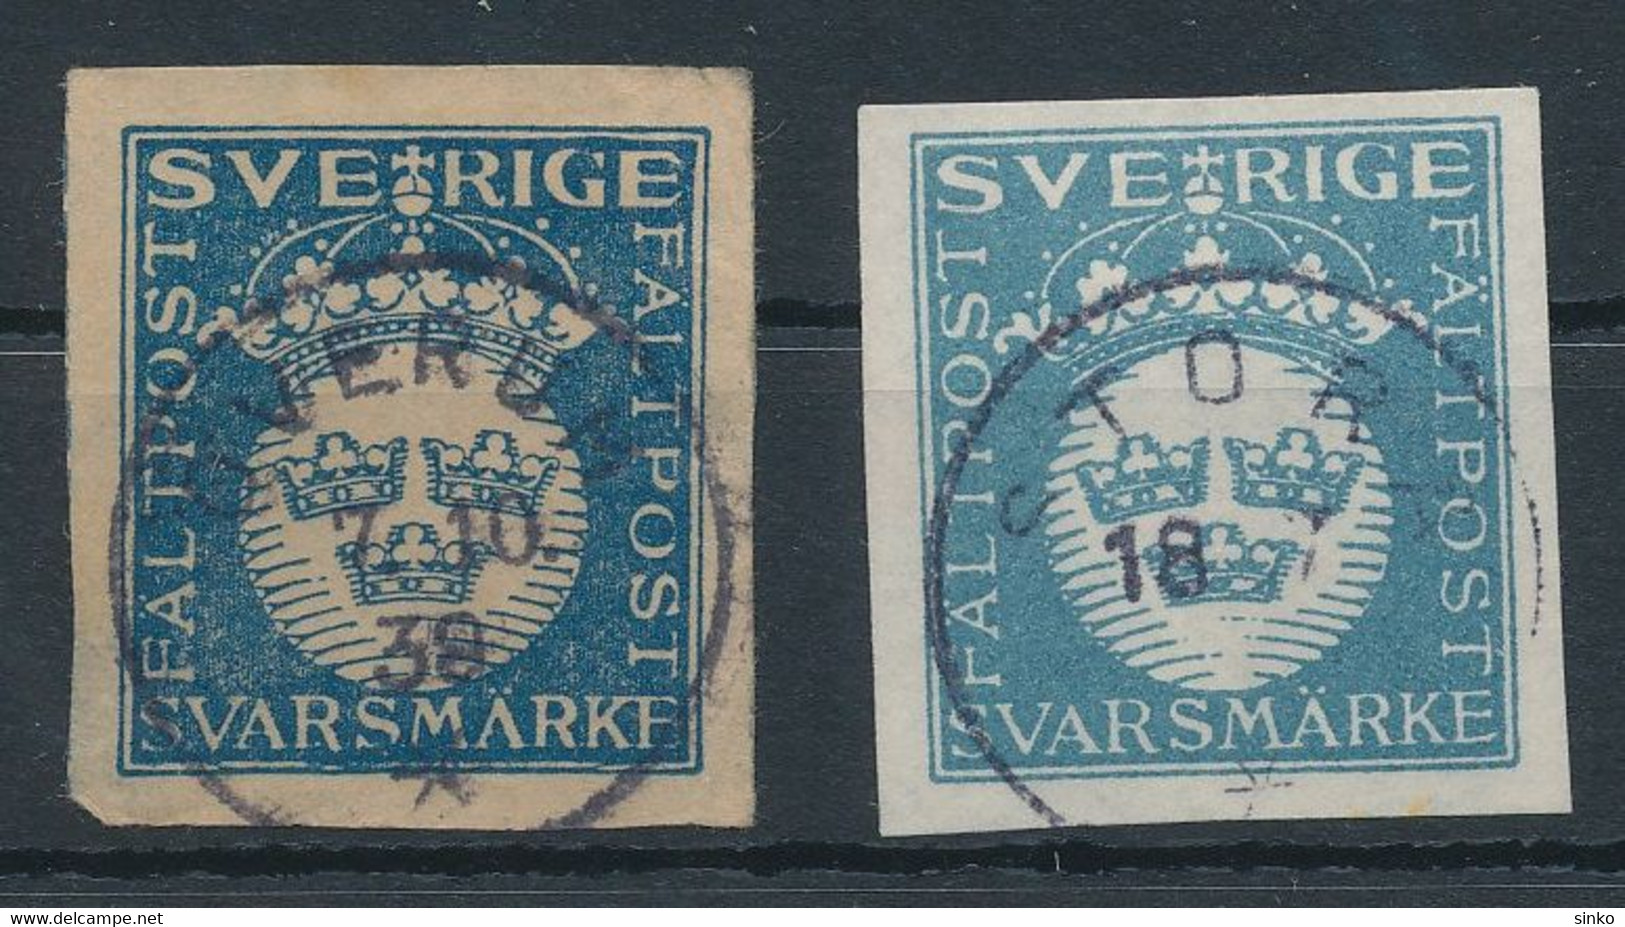 1939. Sweden (Military Post Stamps) - Military